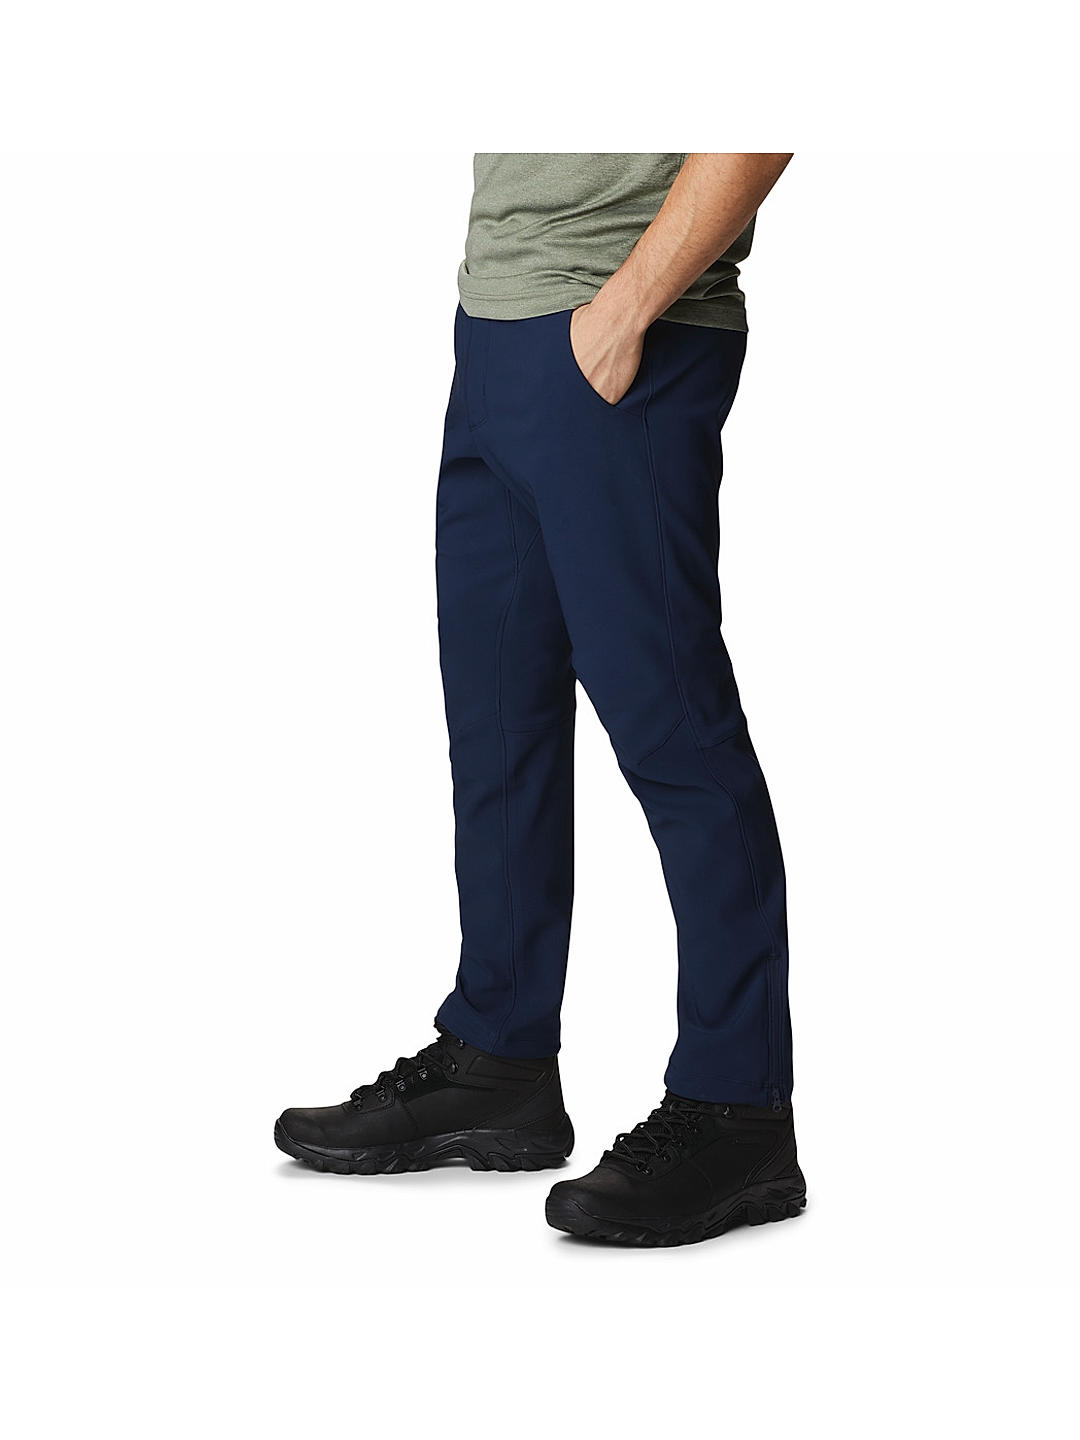 Buy Blue Passo Alto Pant for Women Online at Columbia Sportswear